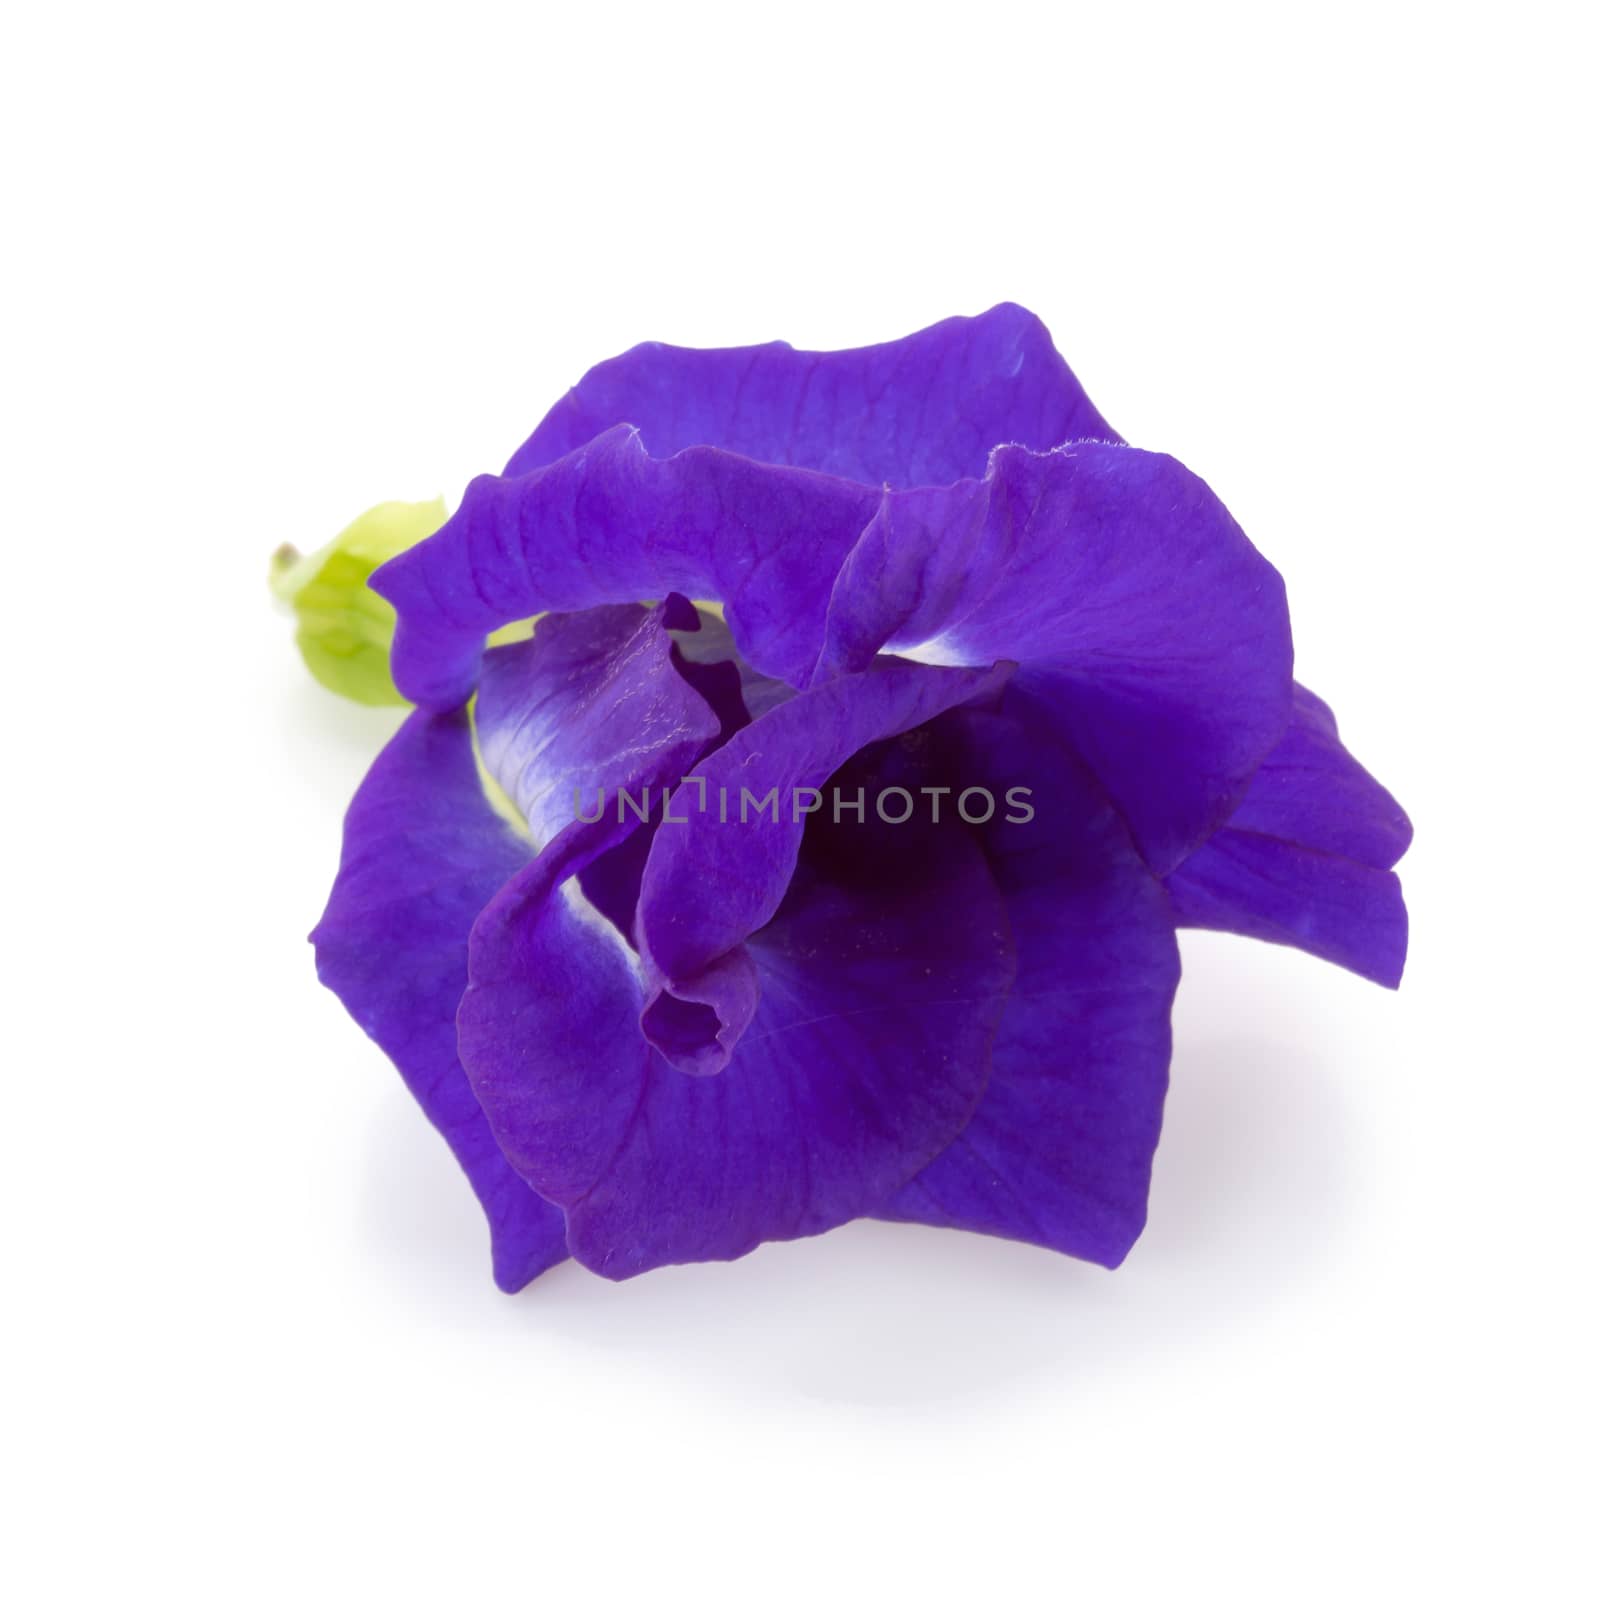 Blue pea flowers isolated on white background by kaiskynet